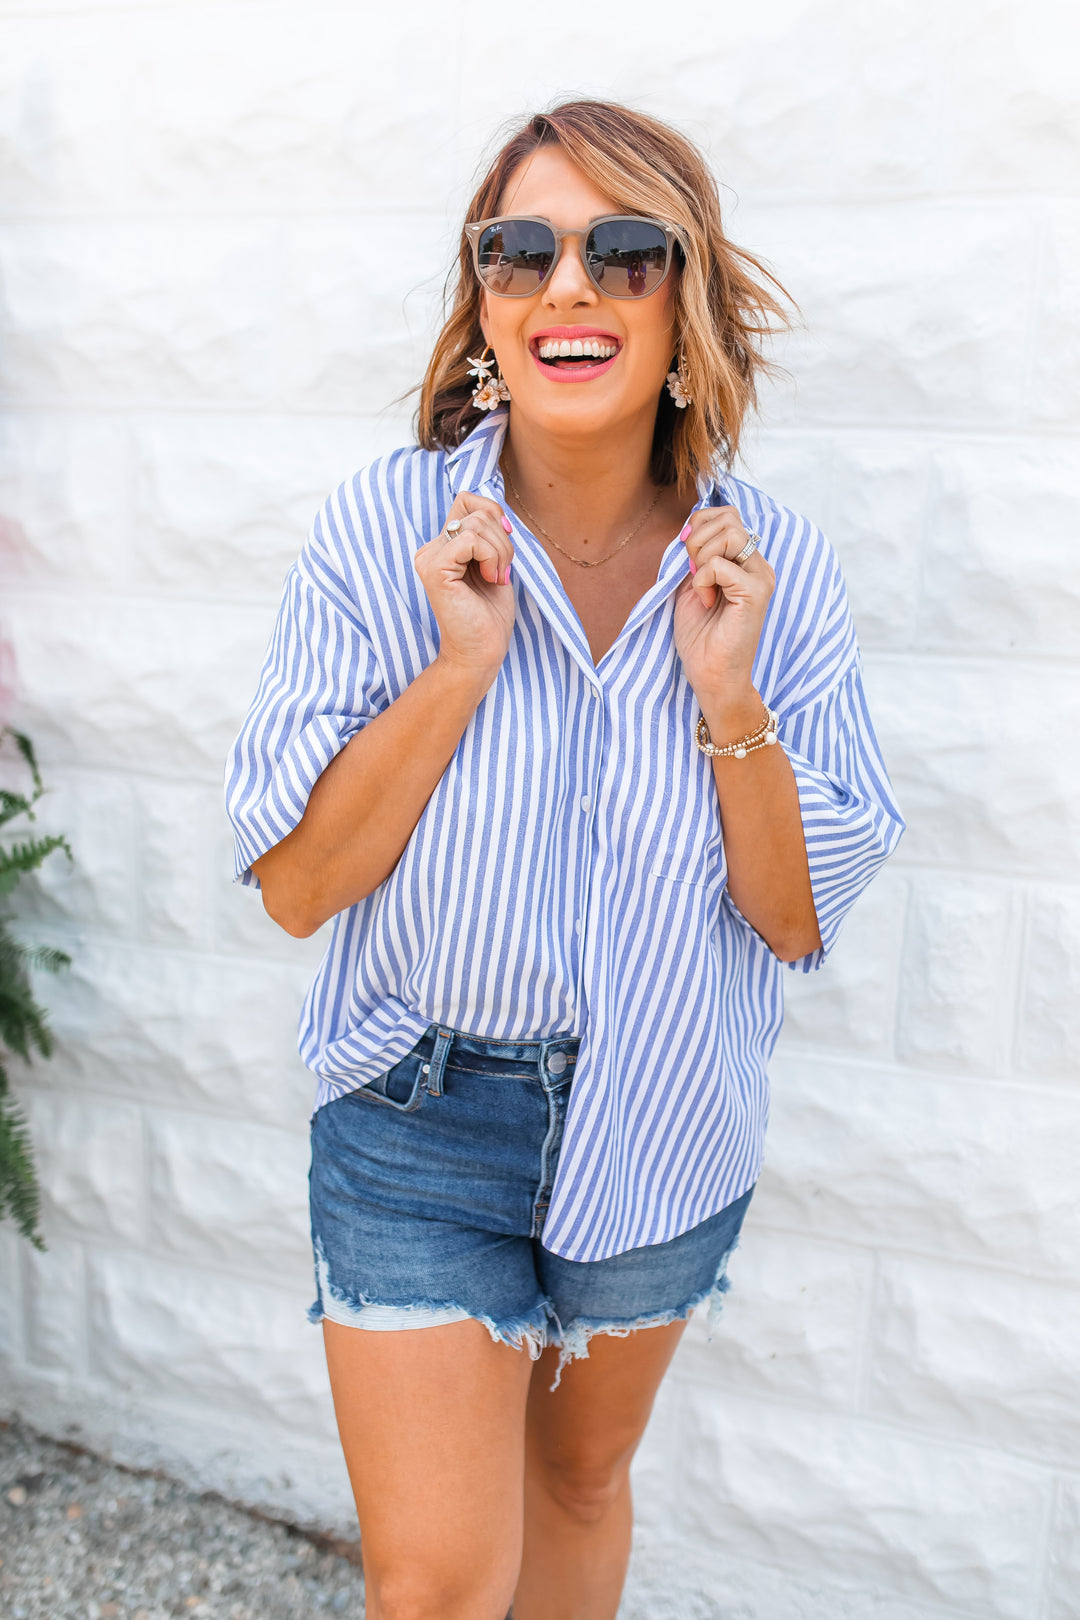 The Liberty Striped Top - Blue/White